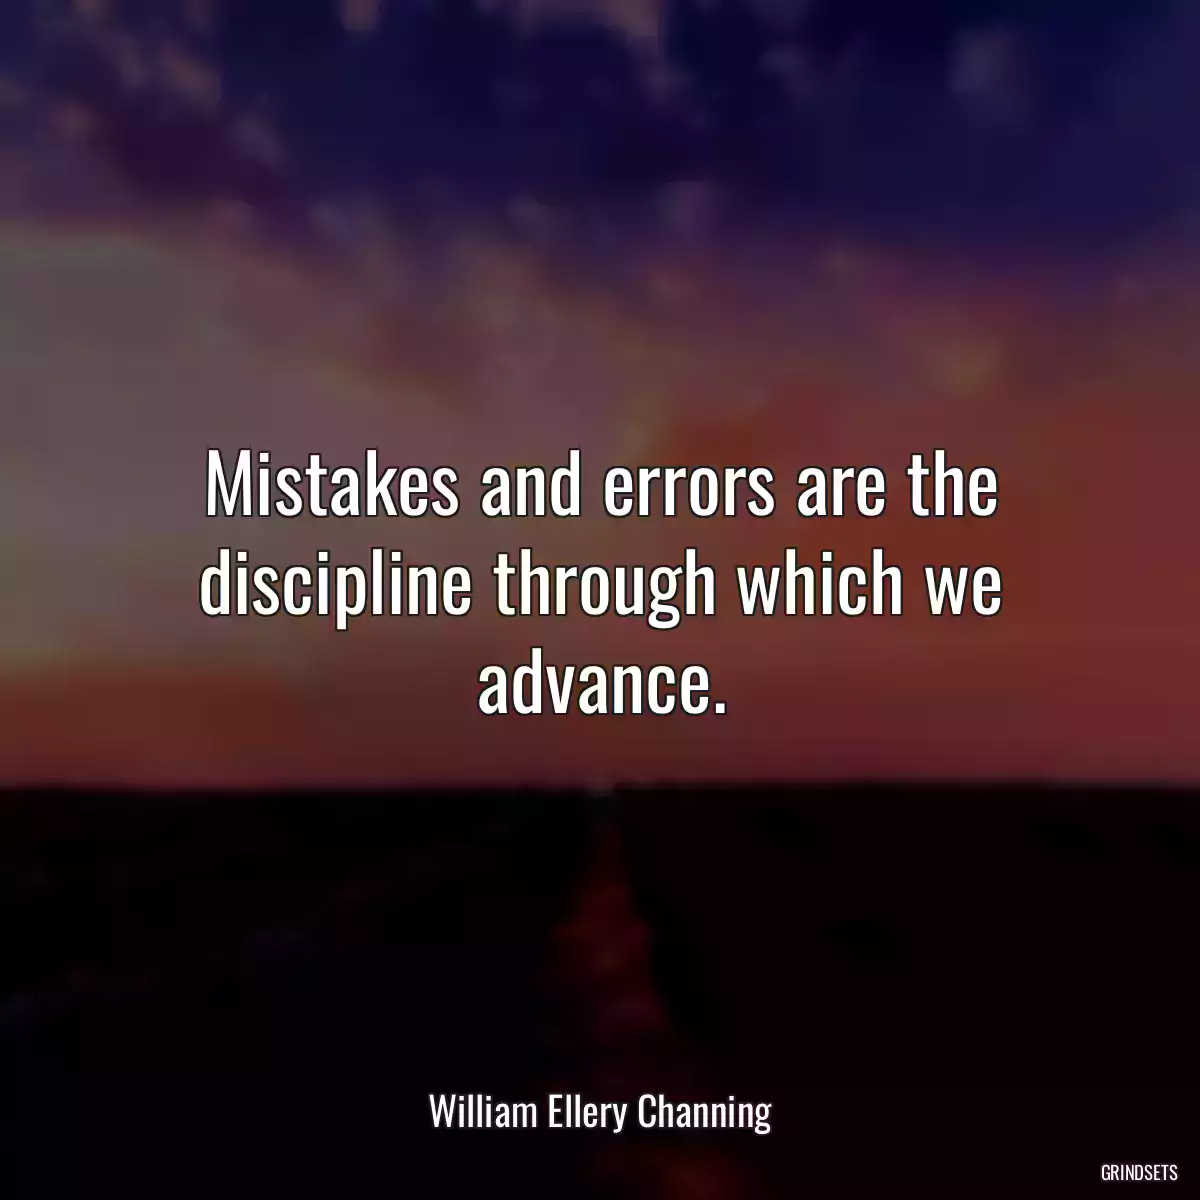 Mistakes and errors are the discipline through which we advance.